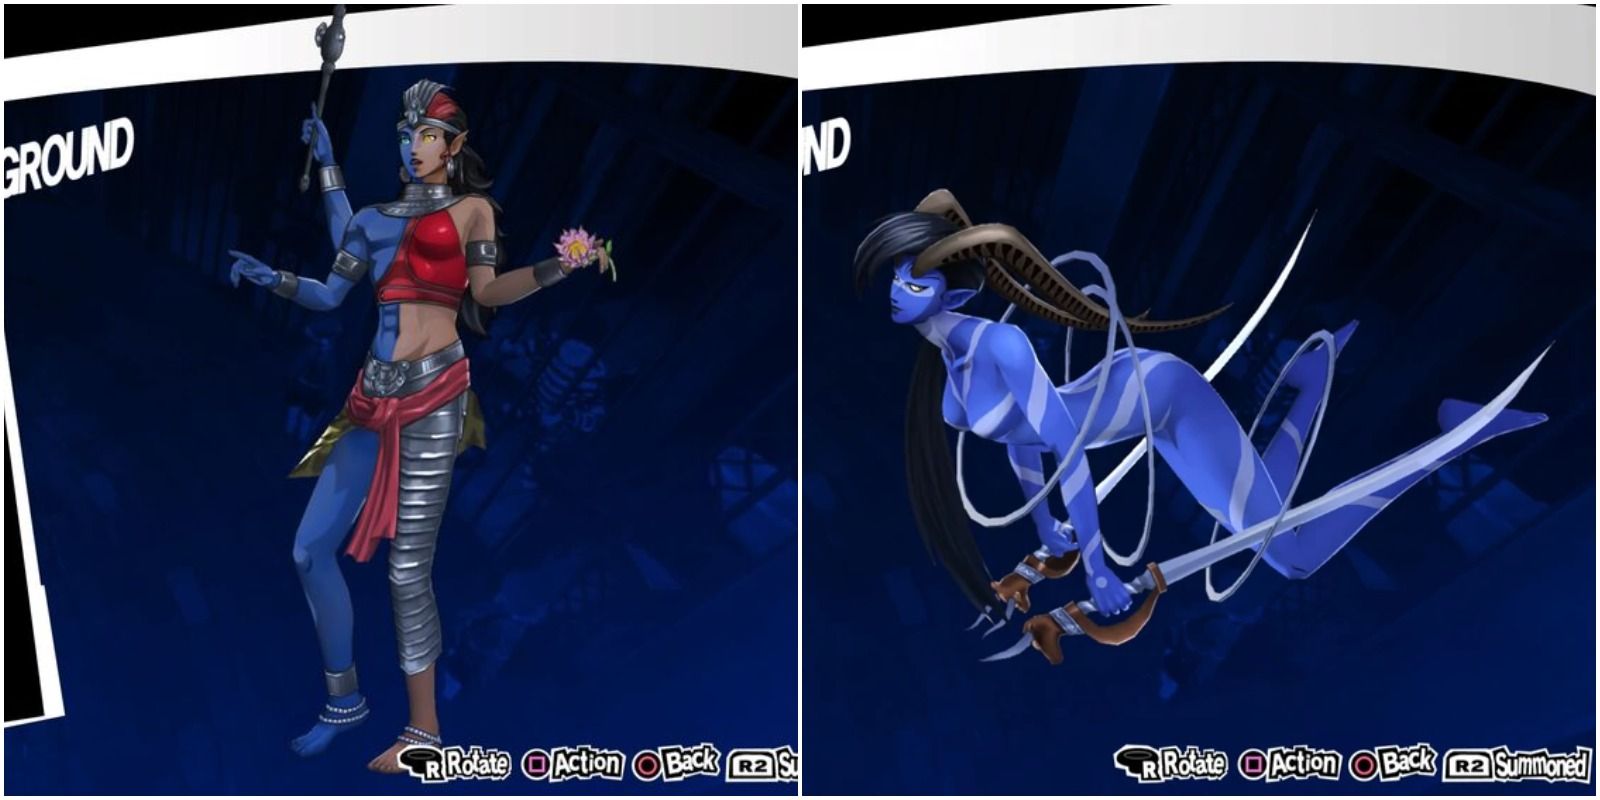 deities from asian and greek mythology in persona 5 royal